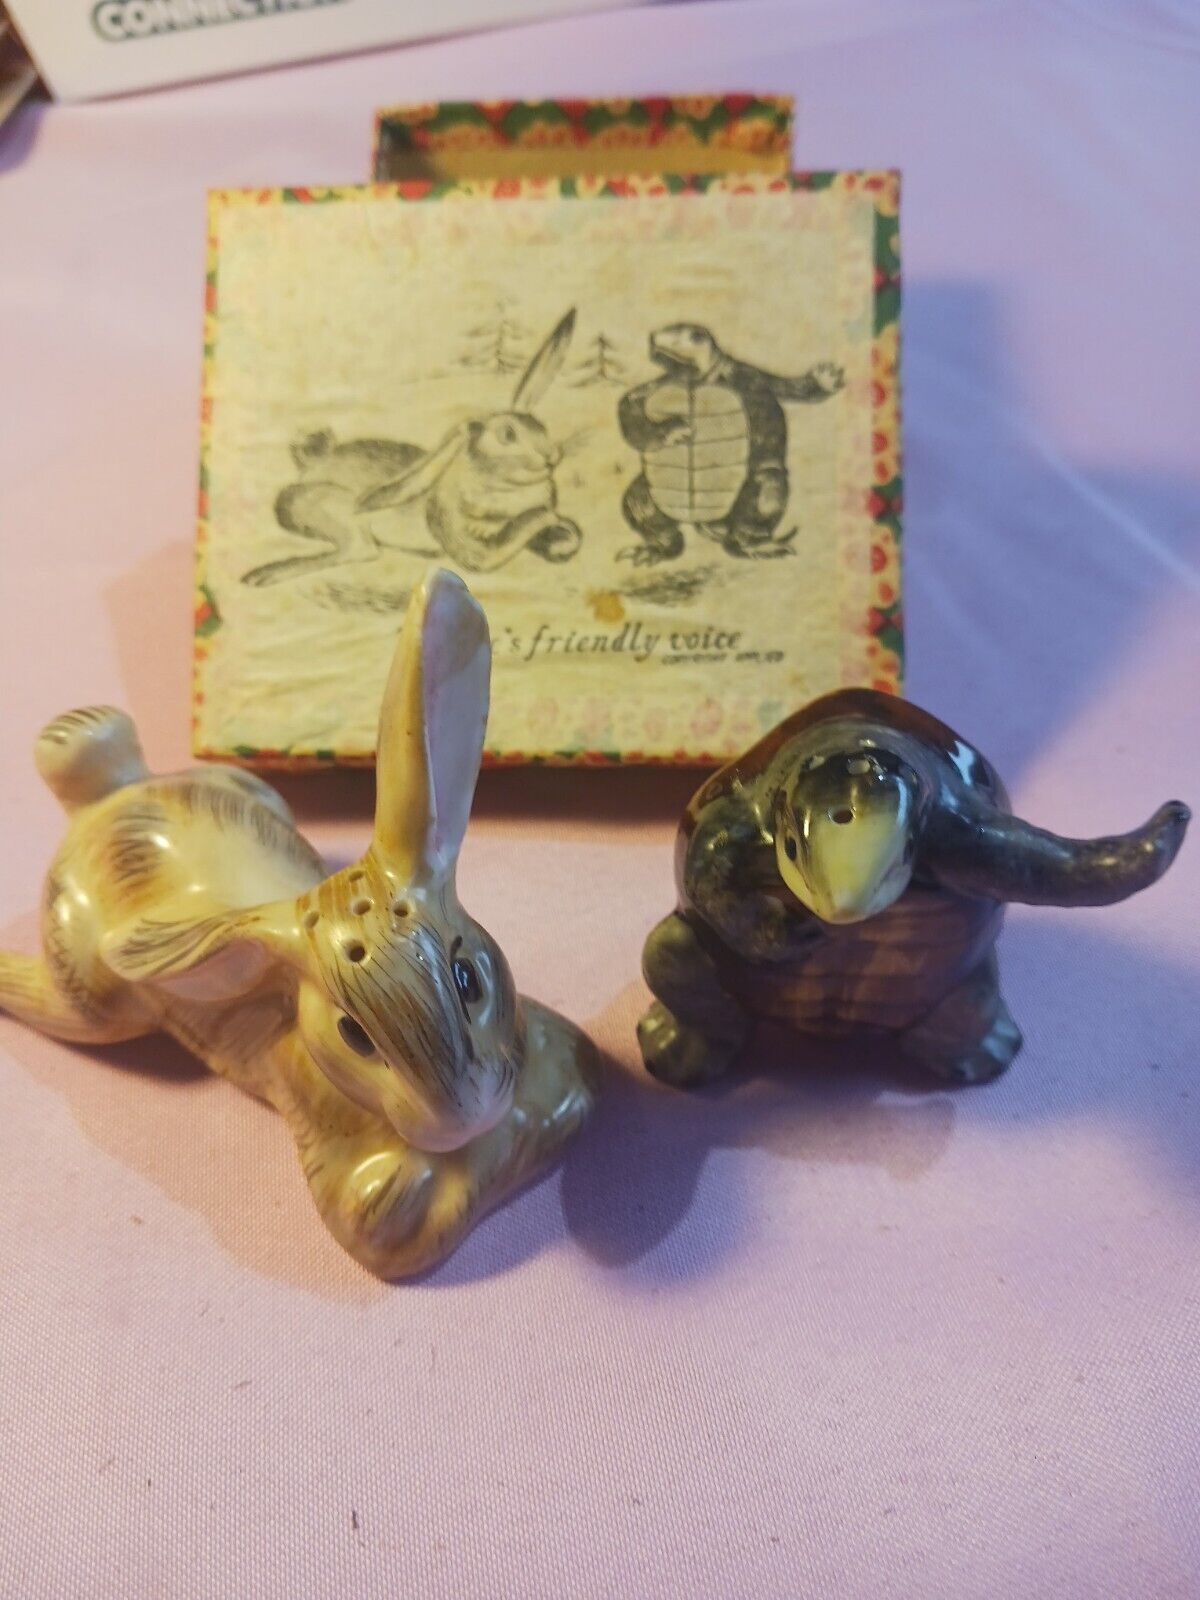 Rare Vintage Turtle And Hare Salt And Pepper Shakers Made In JAPAN ORIG BOX